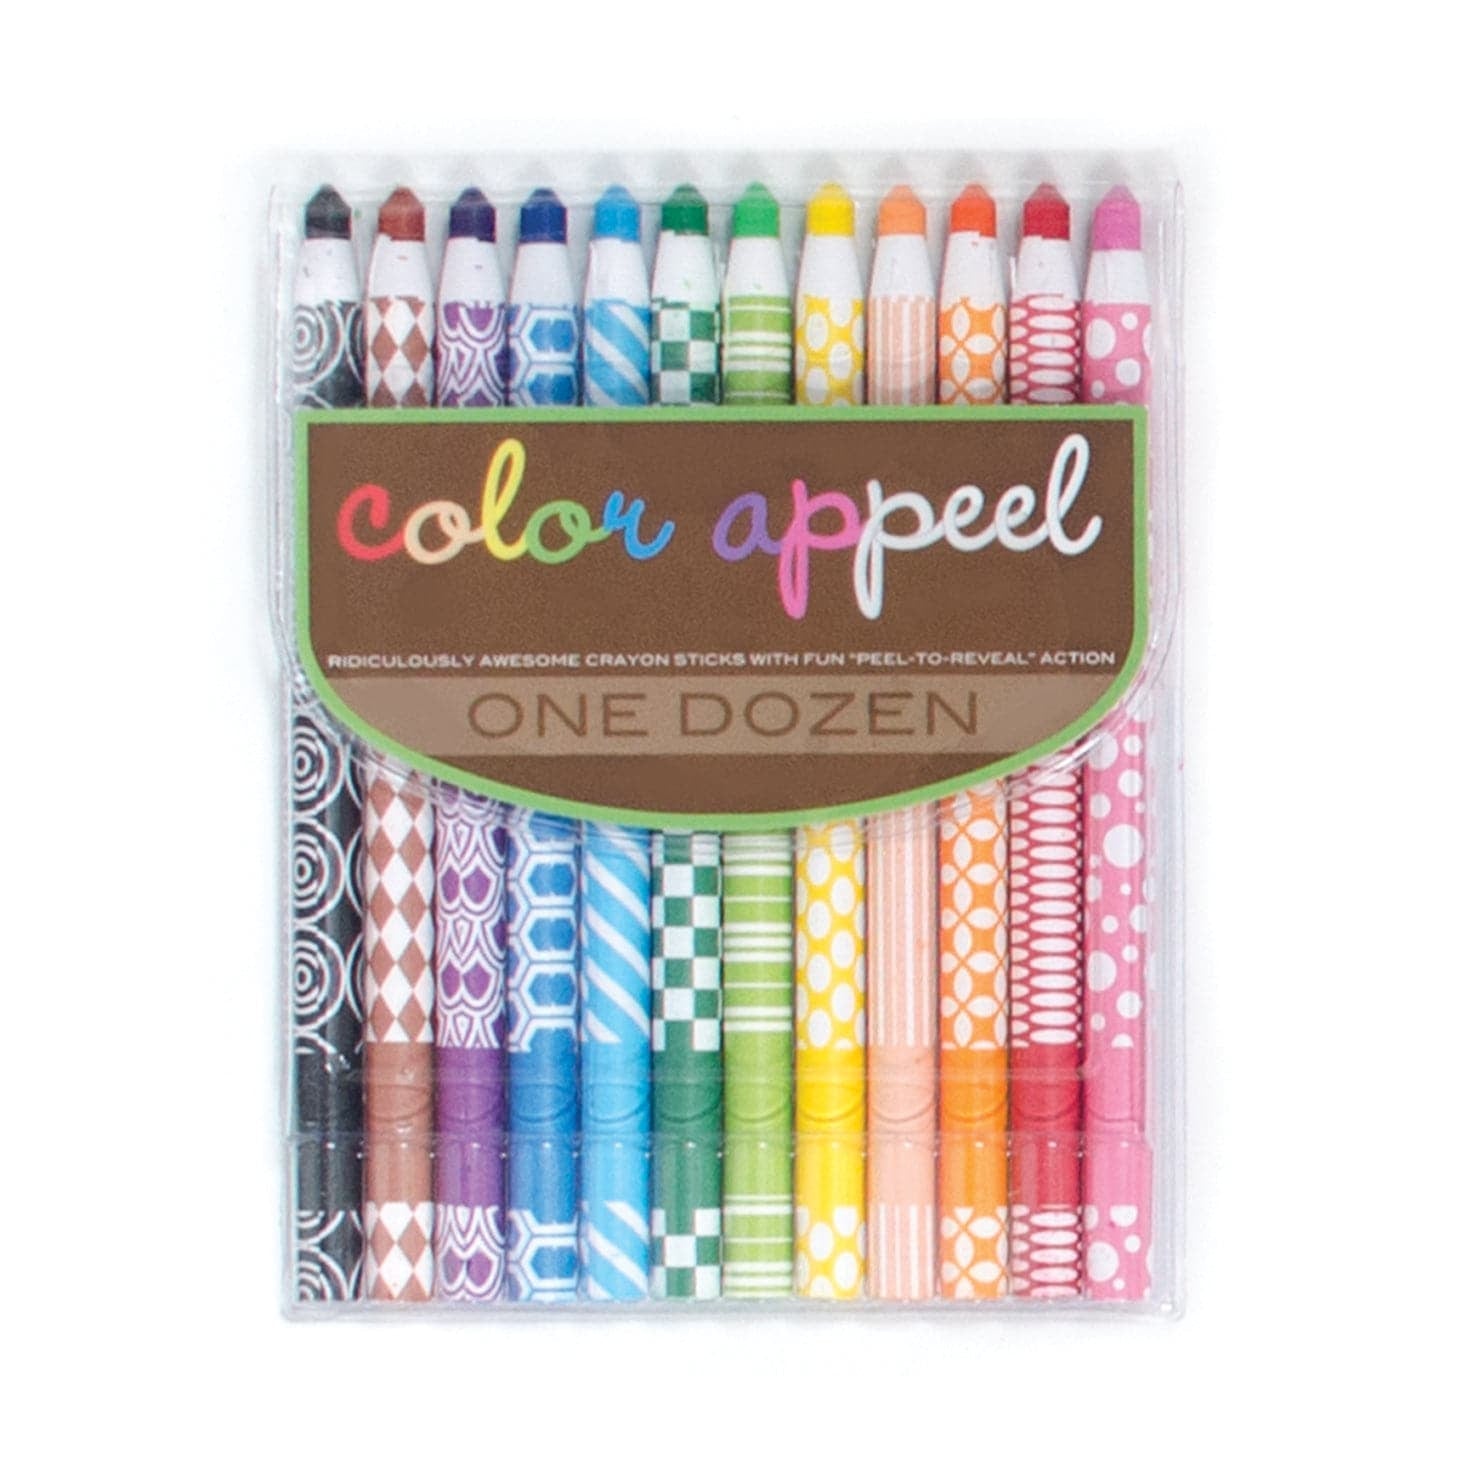 Ooly-Color Appeel Crayon Sticks - Set of 12-133-55-Legacy Toys